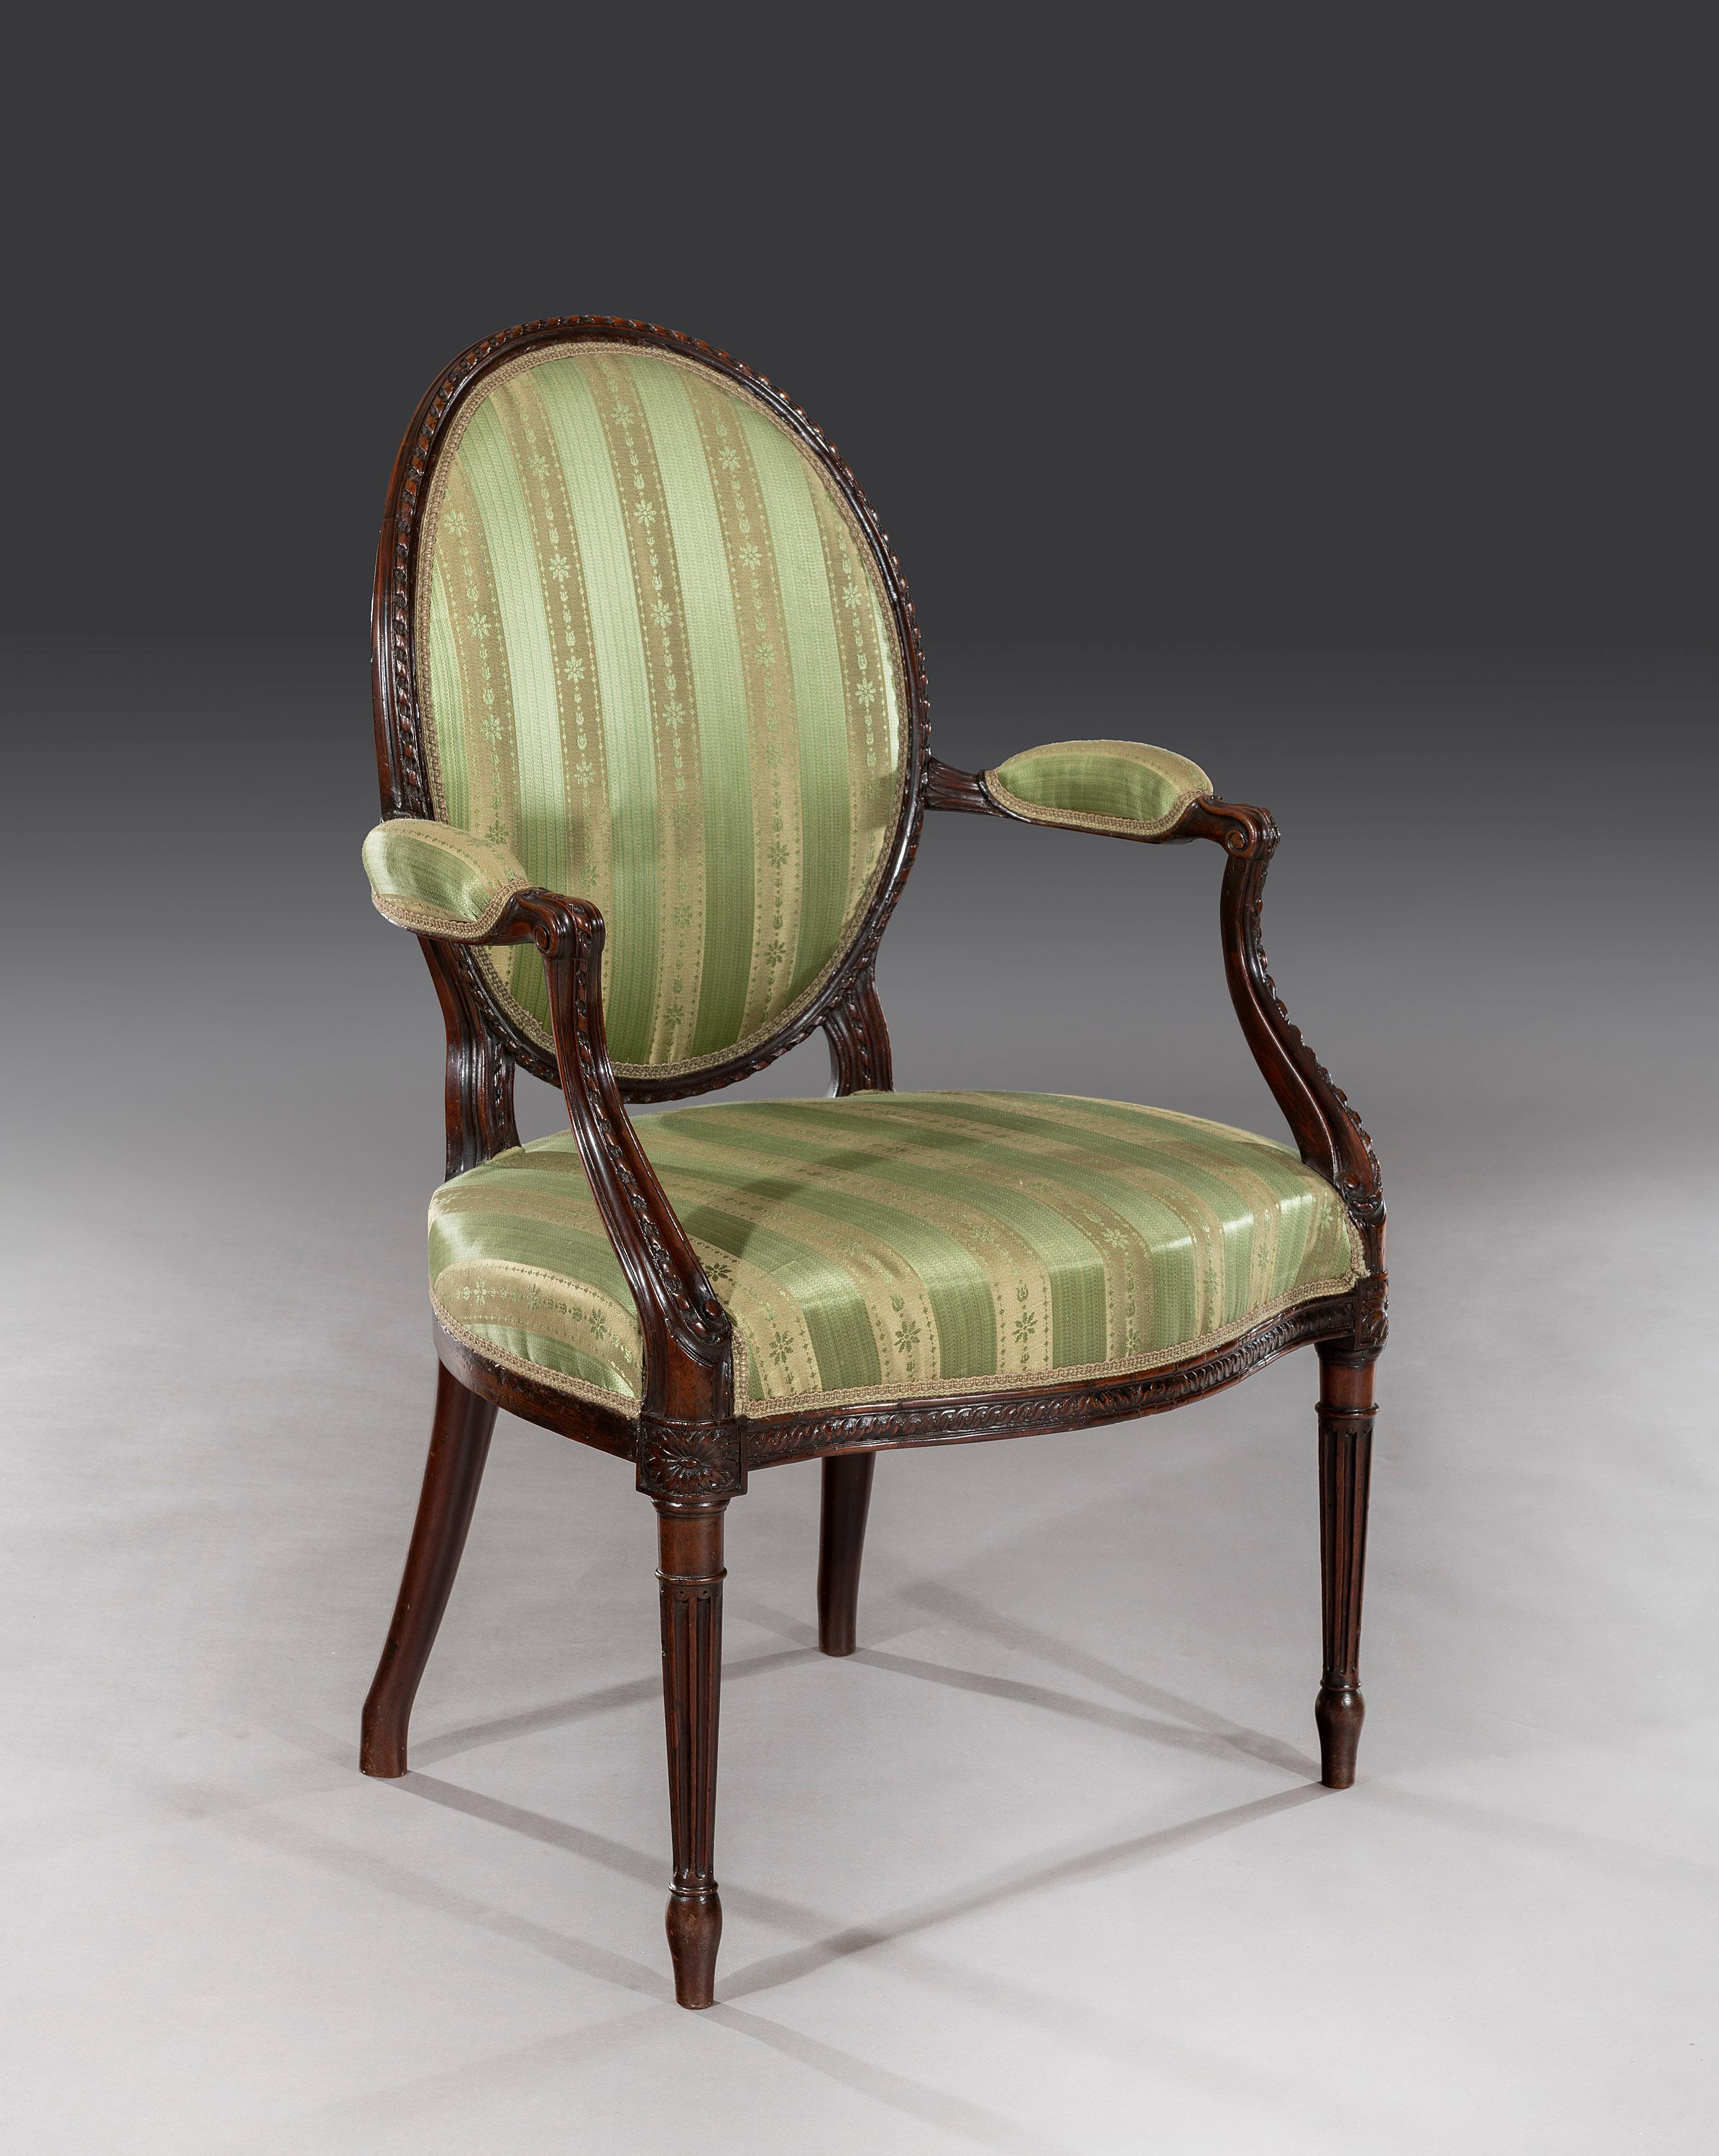 George III 18th Century Adam Period Mahogany Open Armchair In Good Condition For Sale In Bradford on Avon, GB